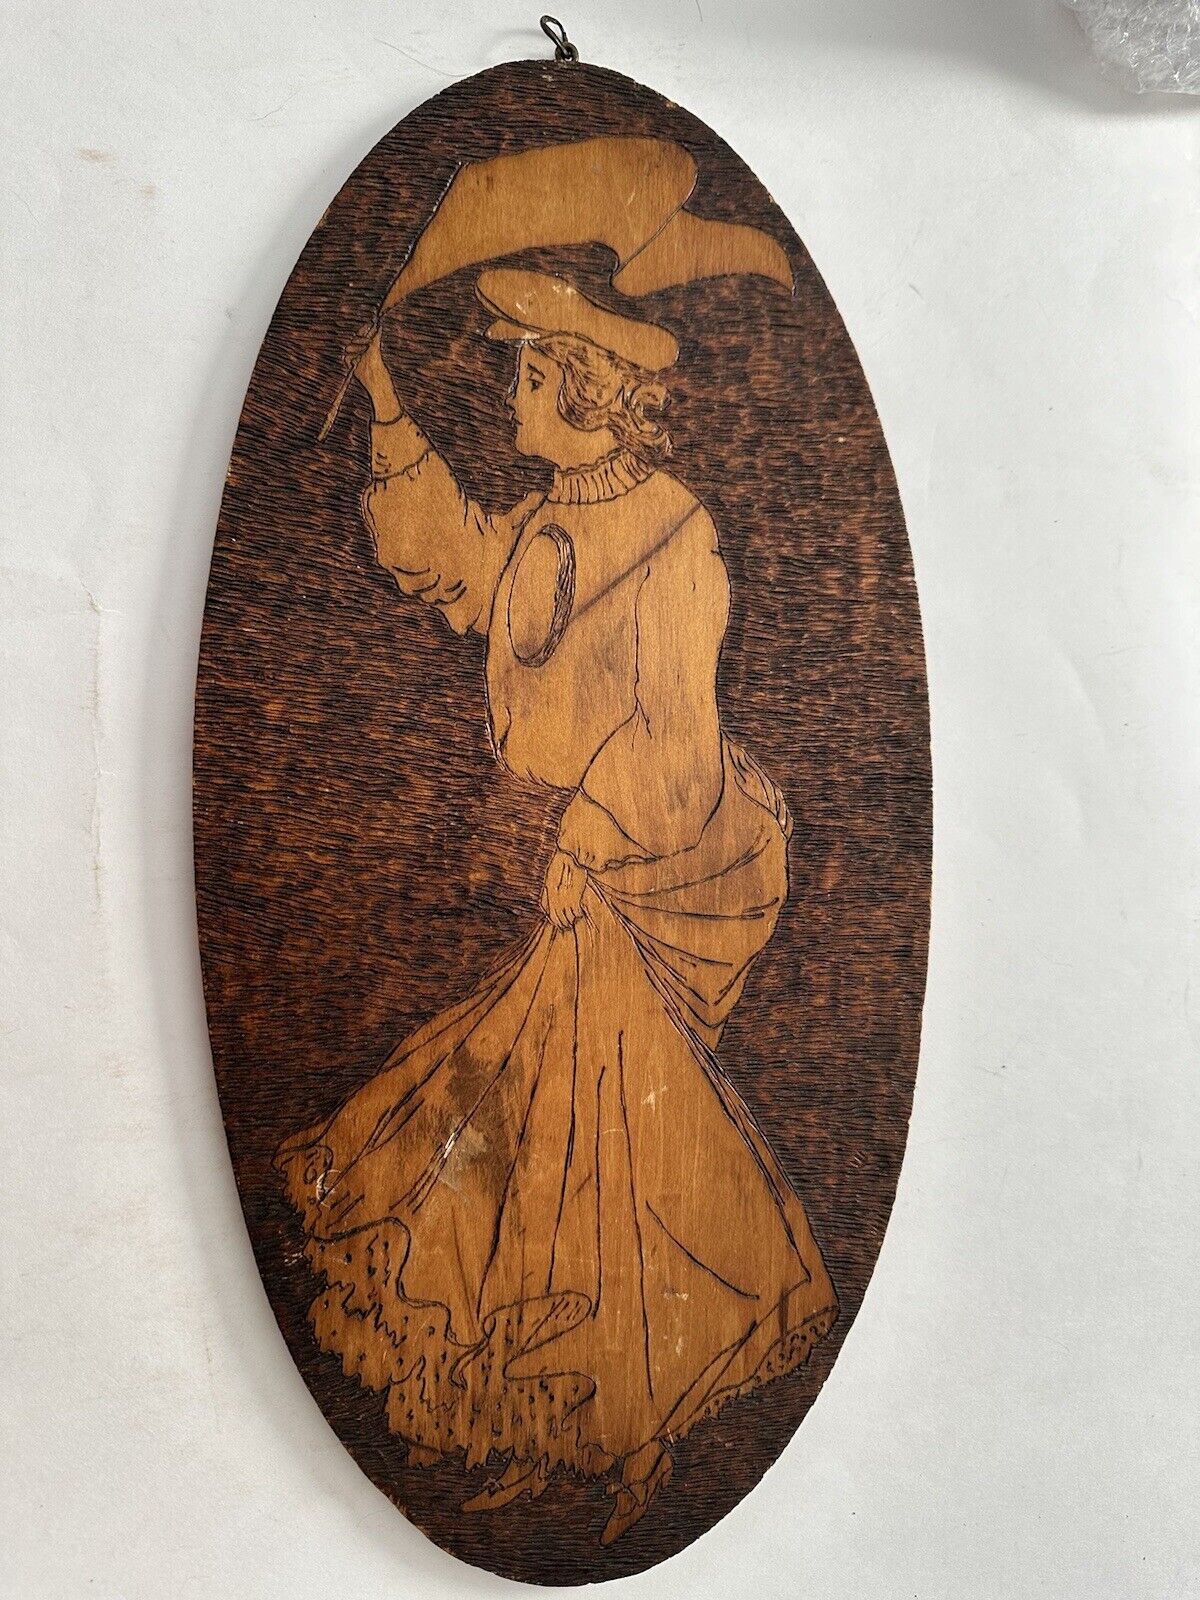 Vintage Art Nouveau Wood Pyrography Oval Wall Plaque  Signed 1900 Victorian Lady